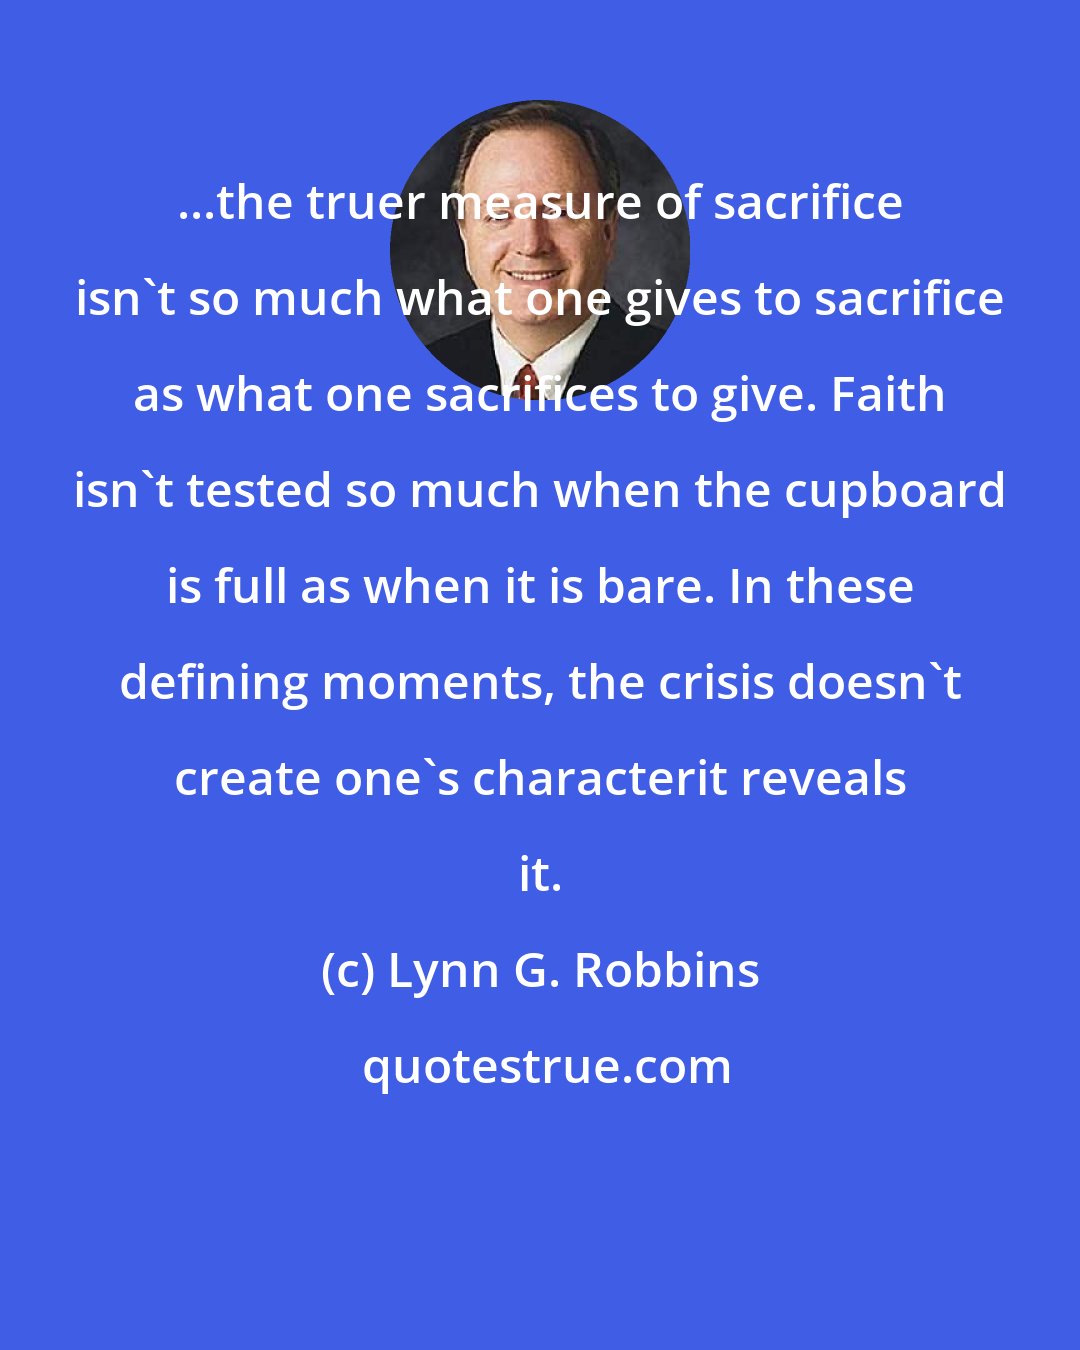 Lynn G. Robbins: ...the truer measure of sacrifice isn't so much what one gives to sacrifice as what one sacrifices to give. Faith isn't tested so much when the cupboard is full as when it is bare. In these defining moments, the crisis doesn't create one's characterit reveals it.